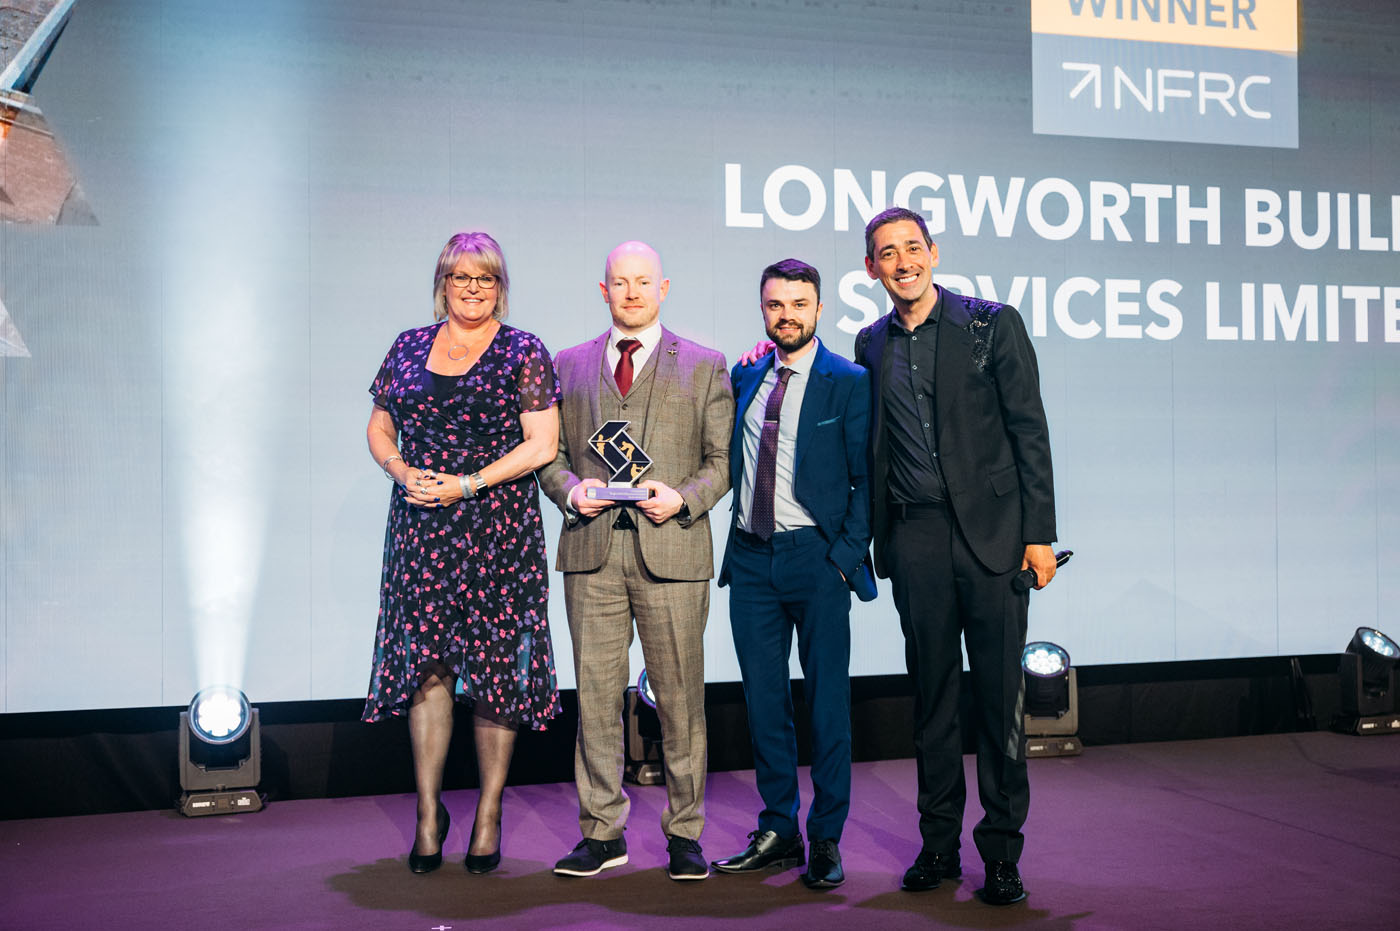 Heritage Roofing winner Longworth Building Services